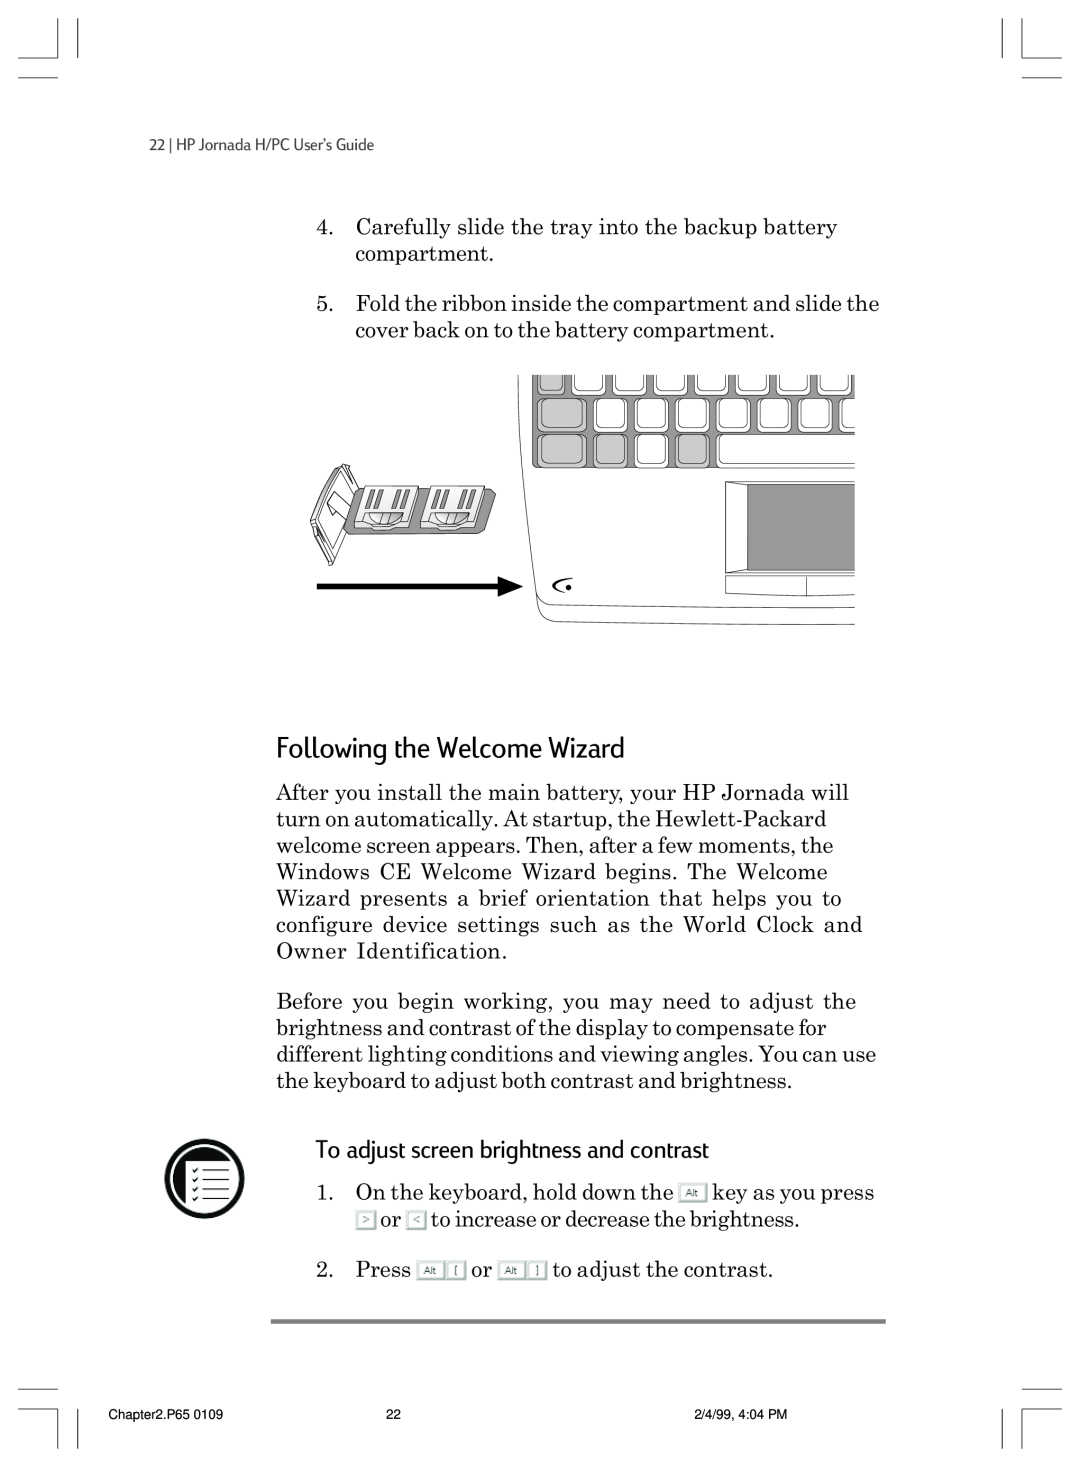 HP 820 E manual Following the Welcome Wizard, To adjust screen brightness and contrast 